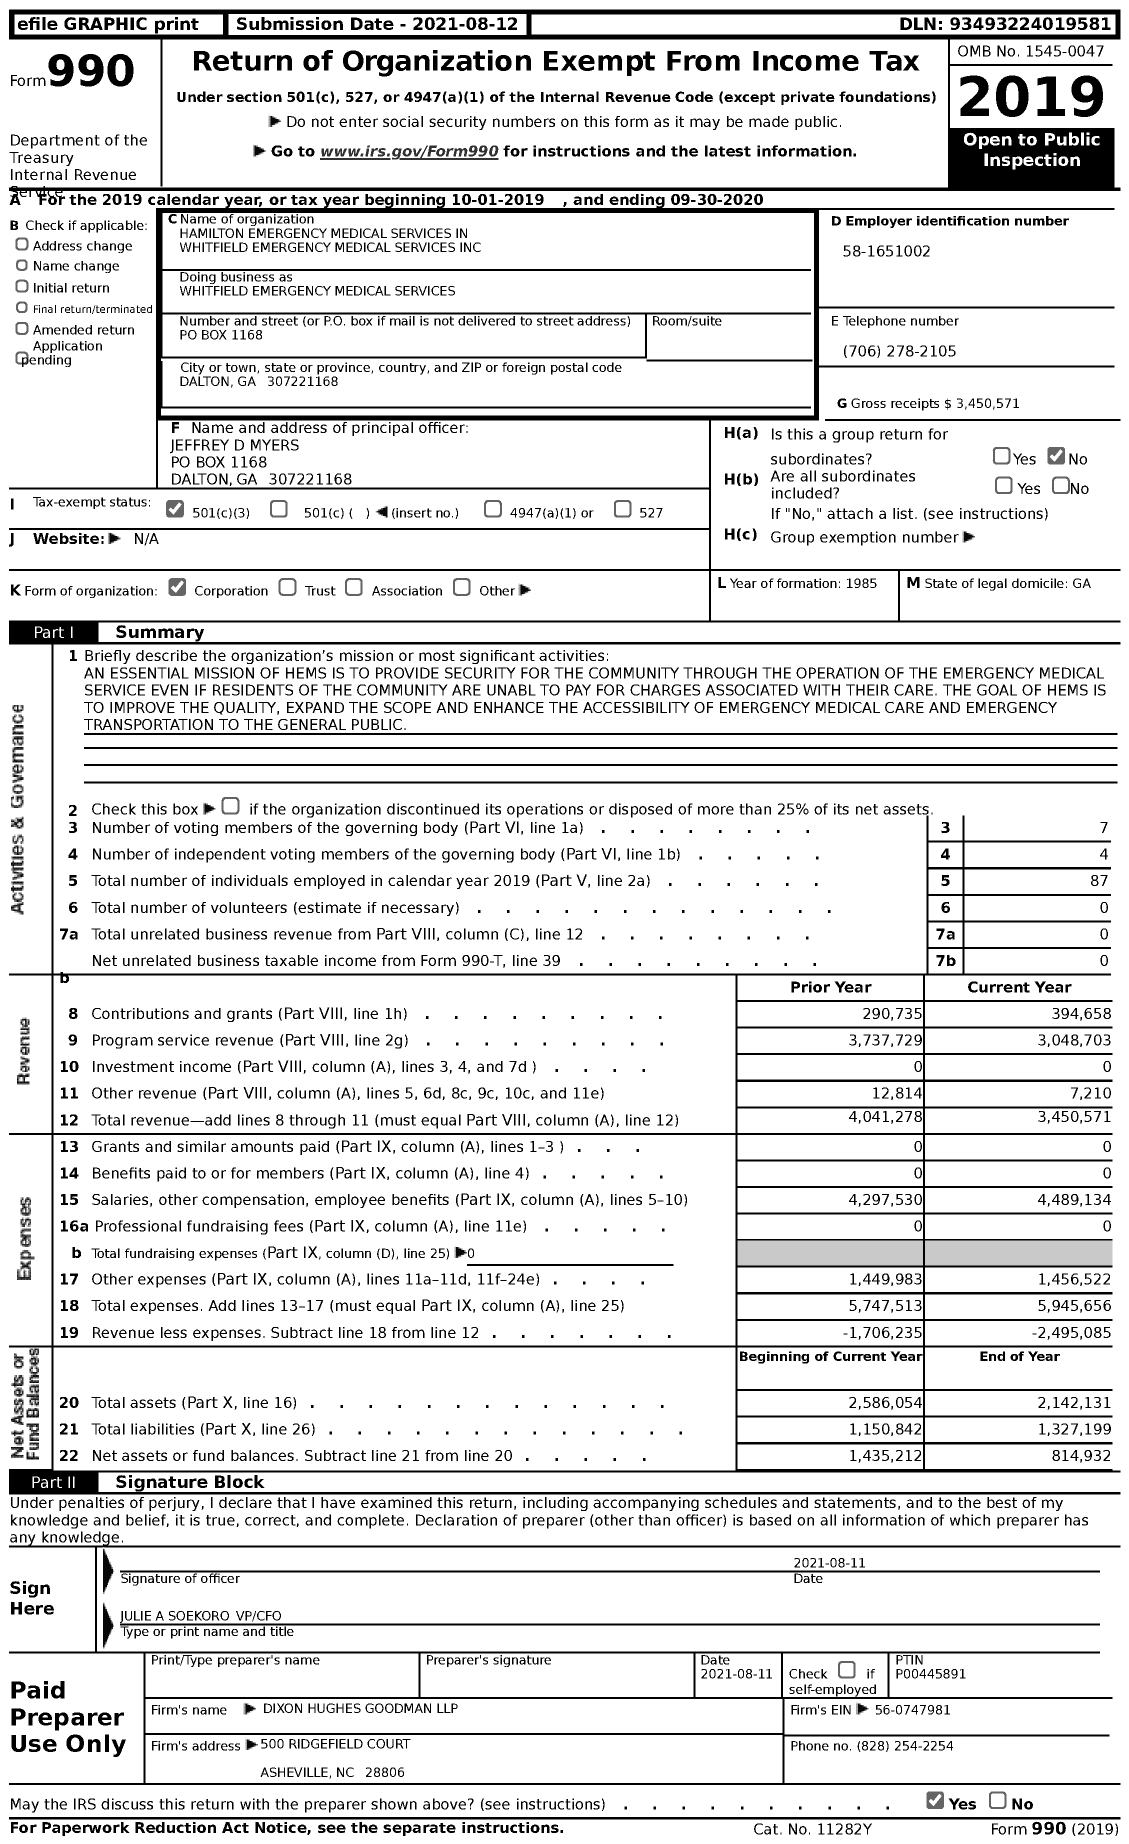 Image of first page of 2019 Form 990 for Hamilton Emergency Medical Services Whitfield Emergency Medical Services